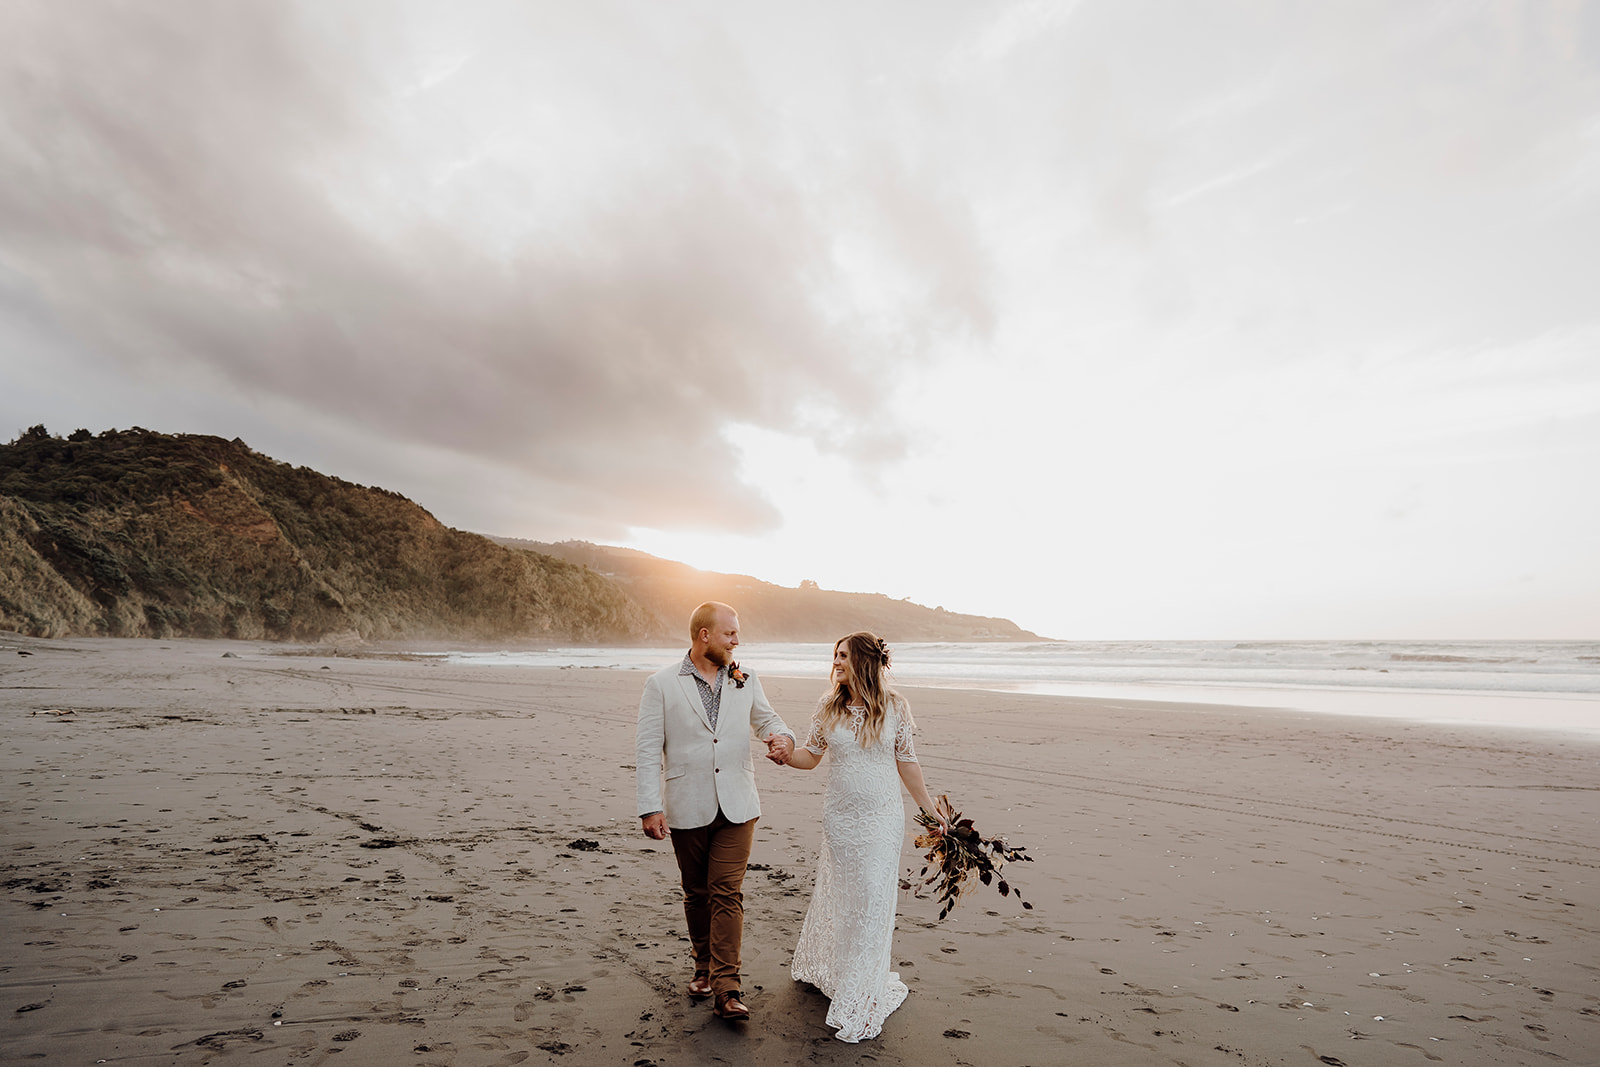 A wedding couple walking along Ngarunui Beach with it's black sand and low tides, photographed by Haley Adele Photography